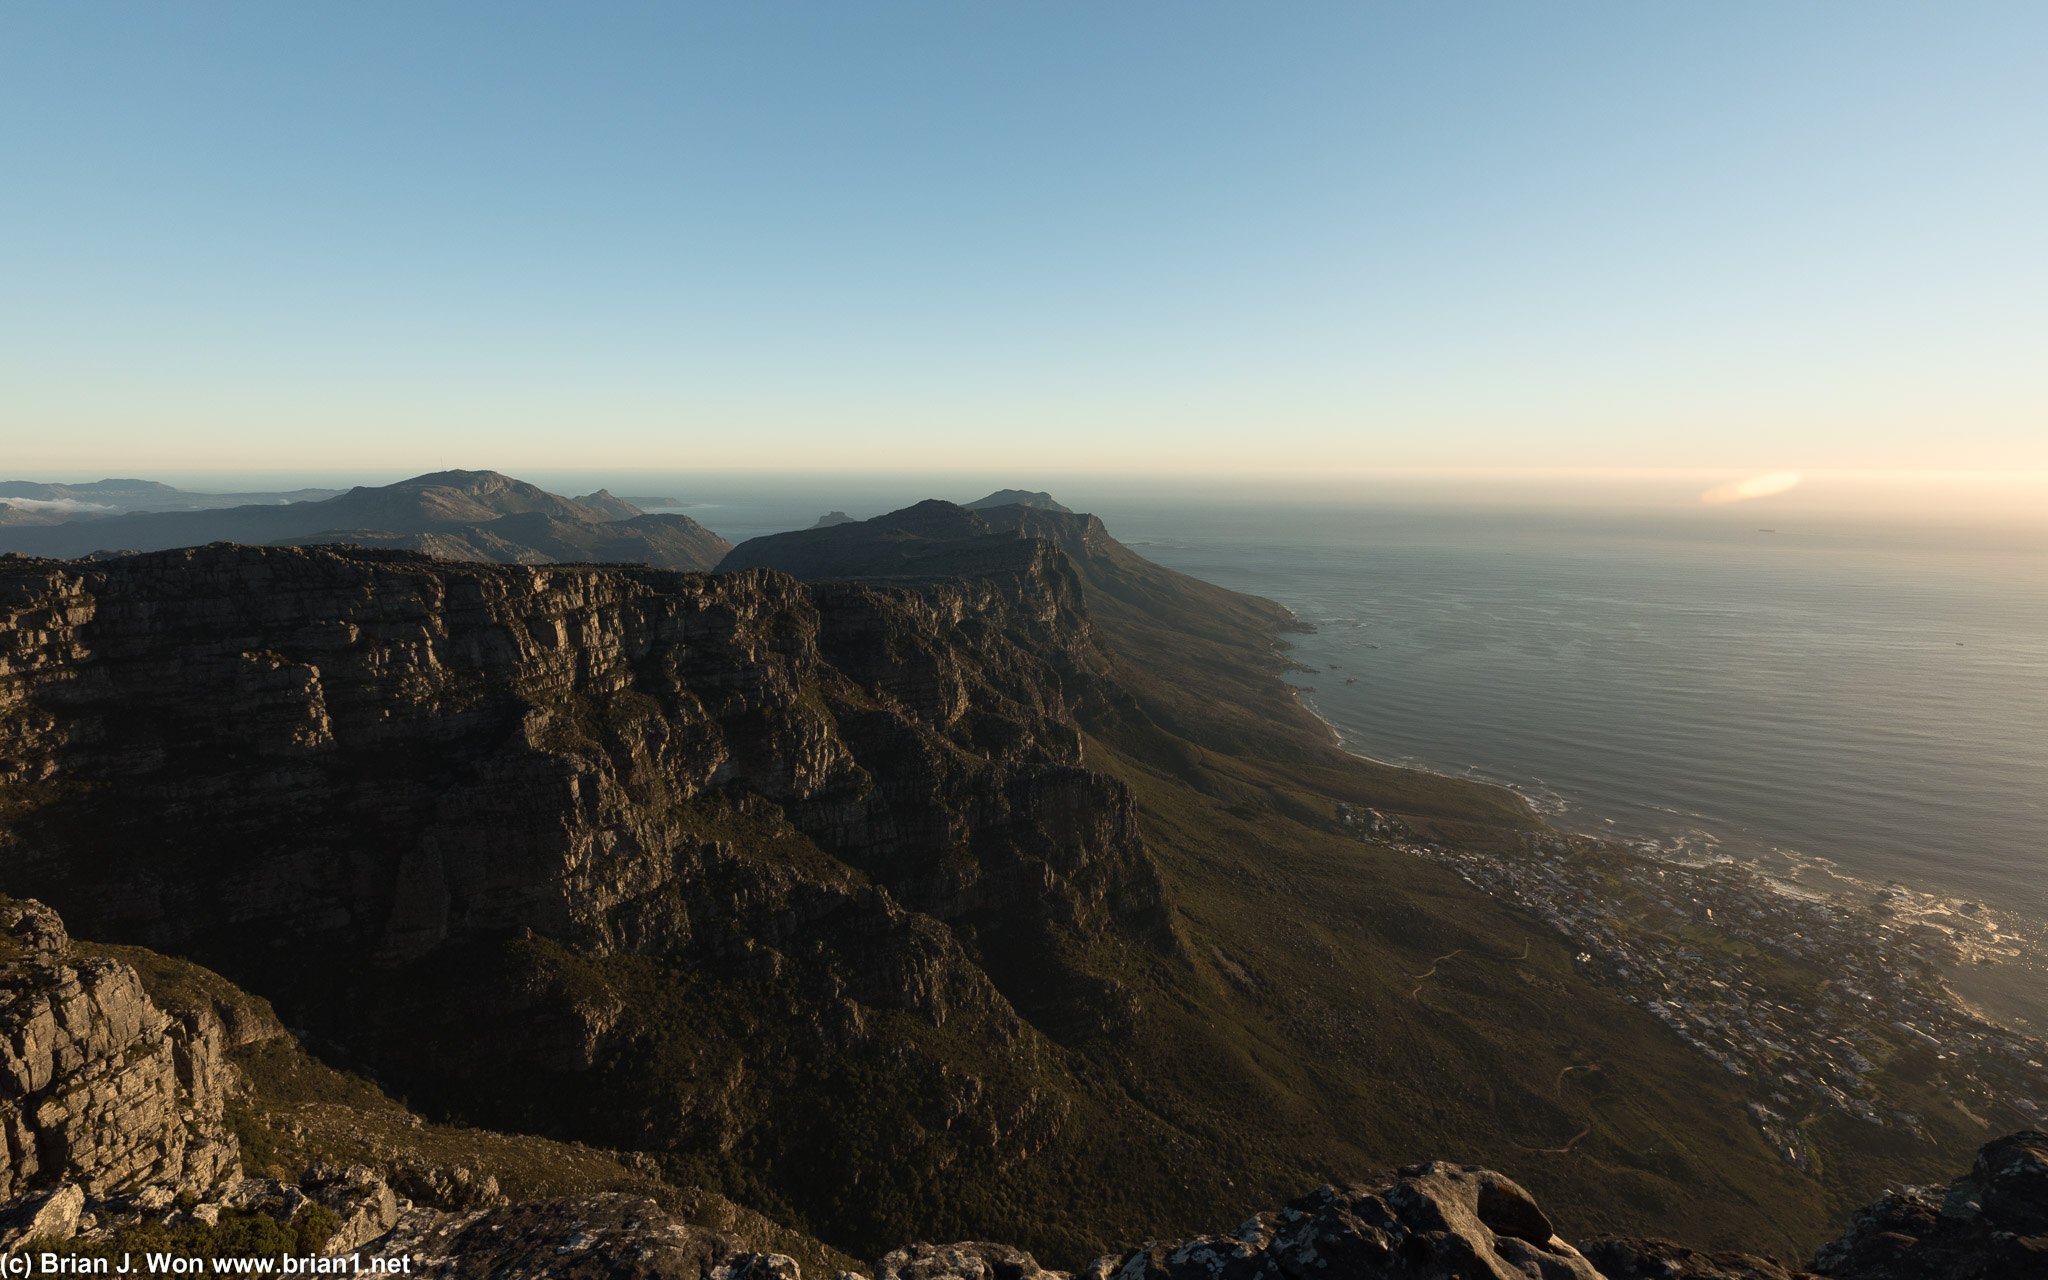 The lower flanks of Table Mountain are lush and green.